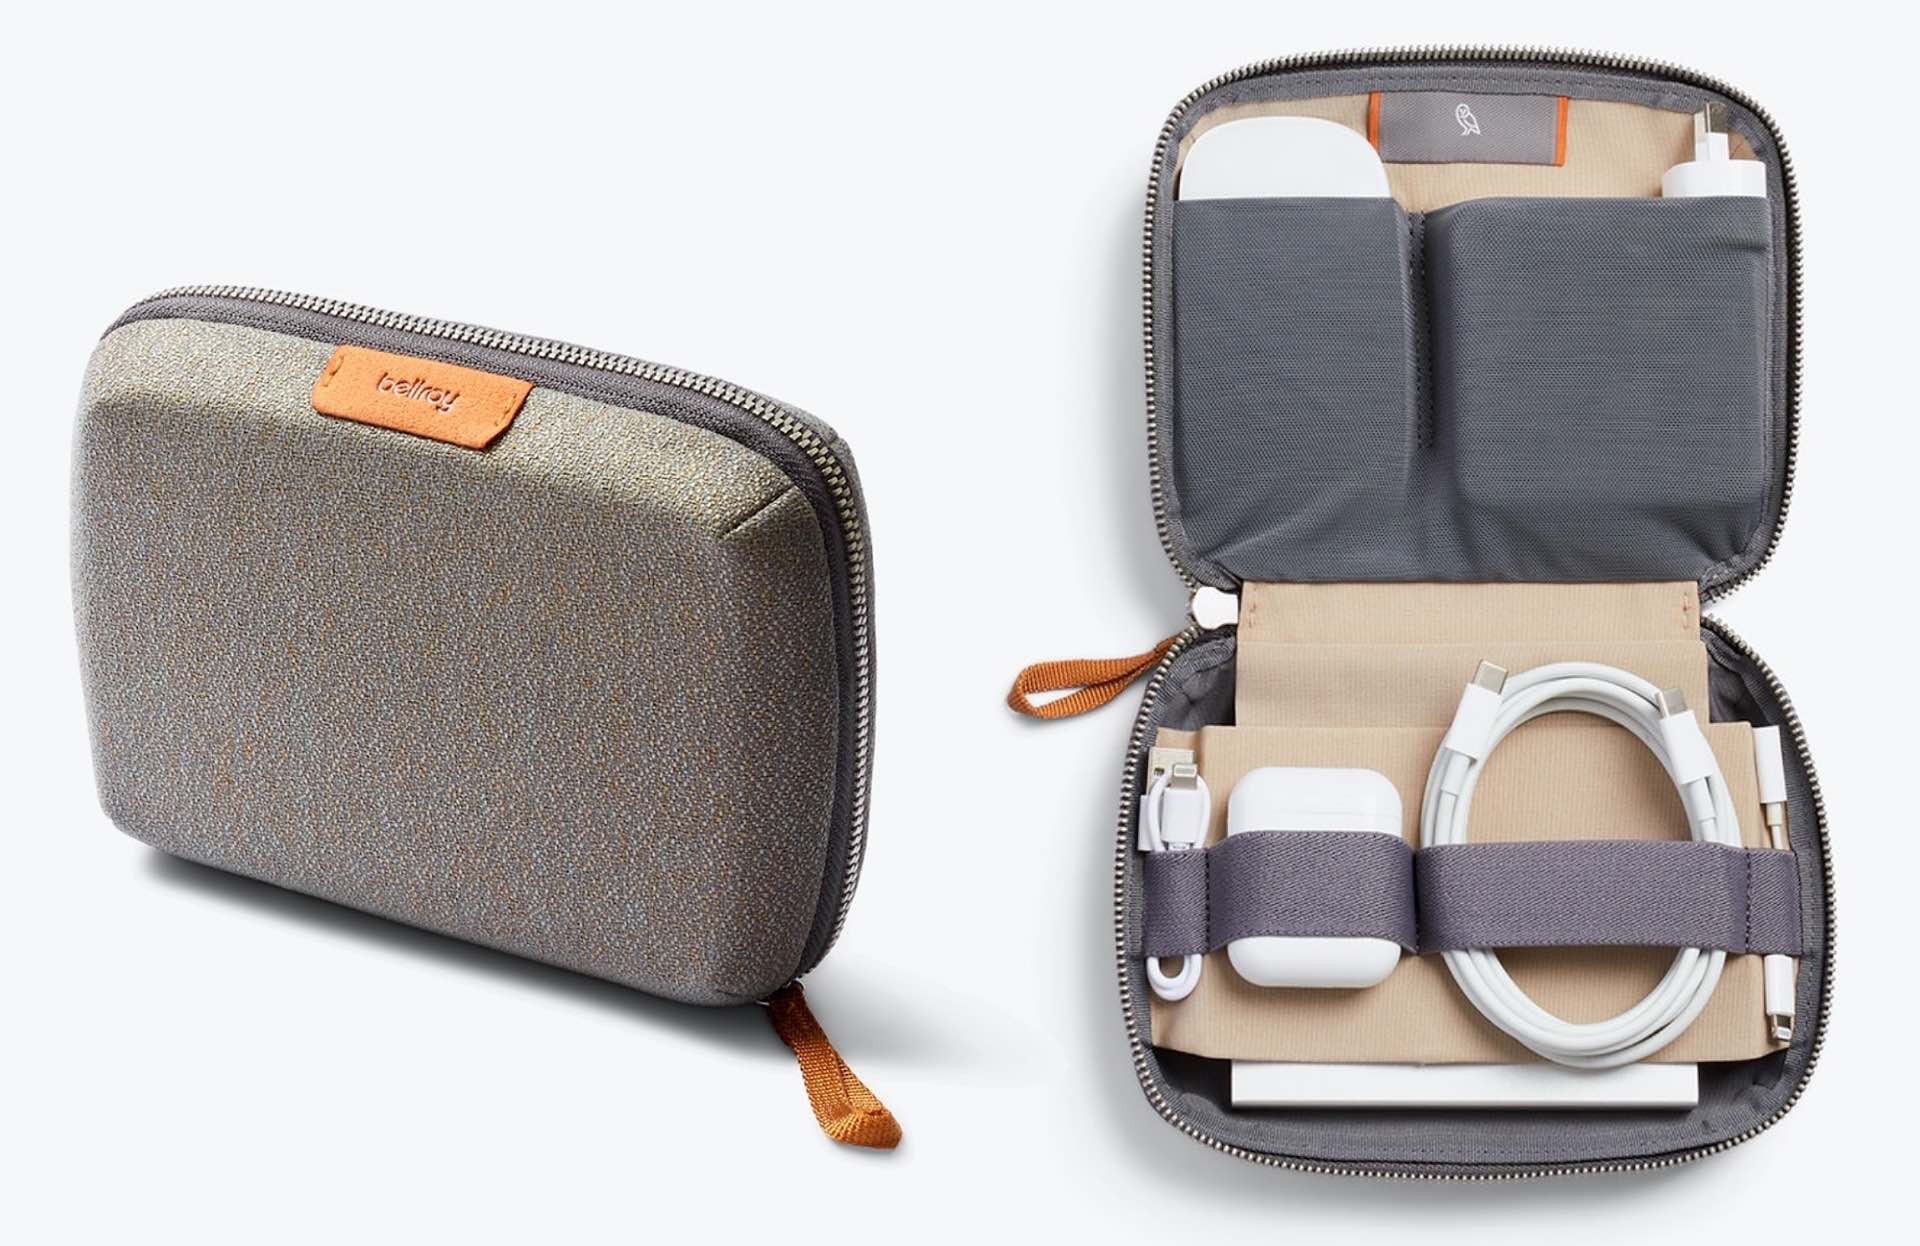 Bellroy Tech Kit Compact organizer pouch. ($55, available in a variety of colors/materials)